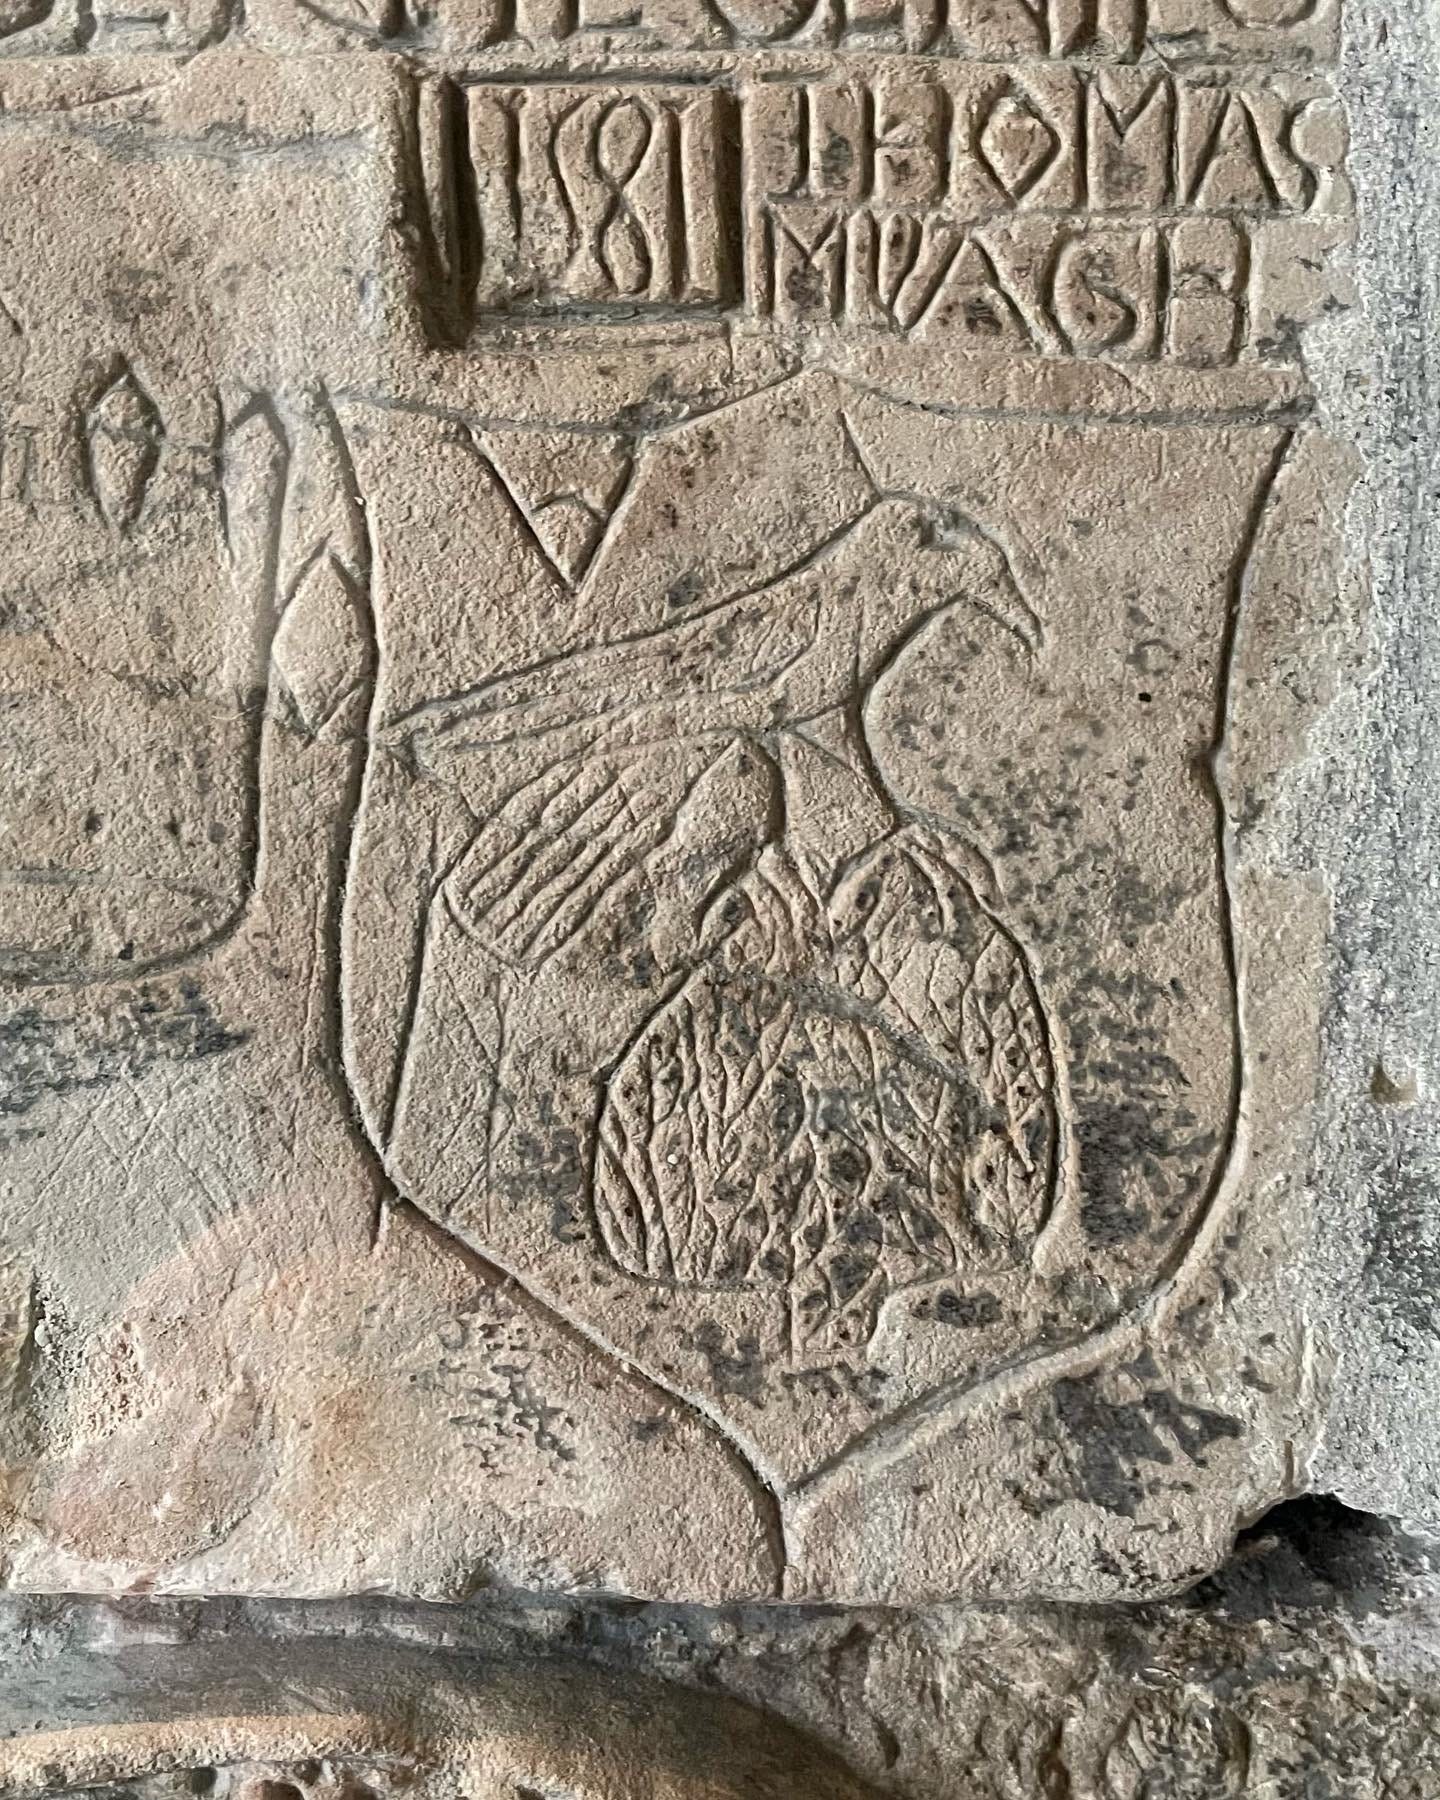 A carving in stone of a crude falcon within a shield shape